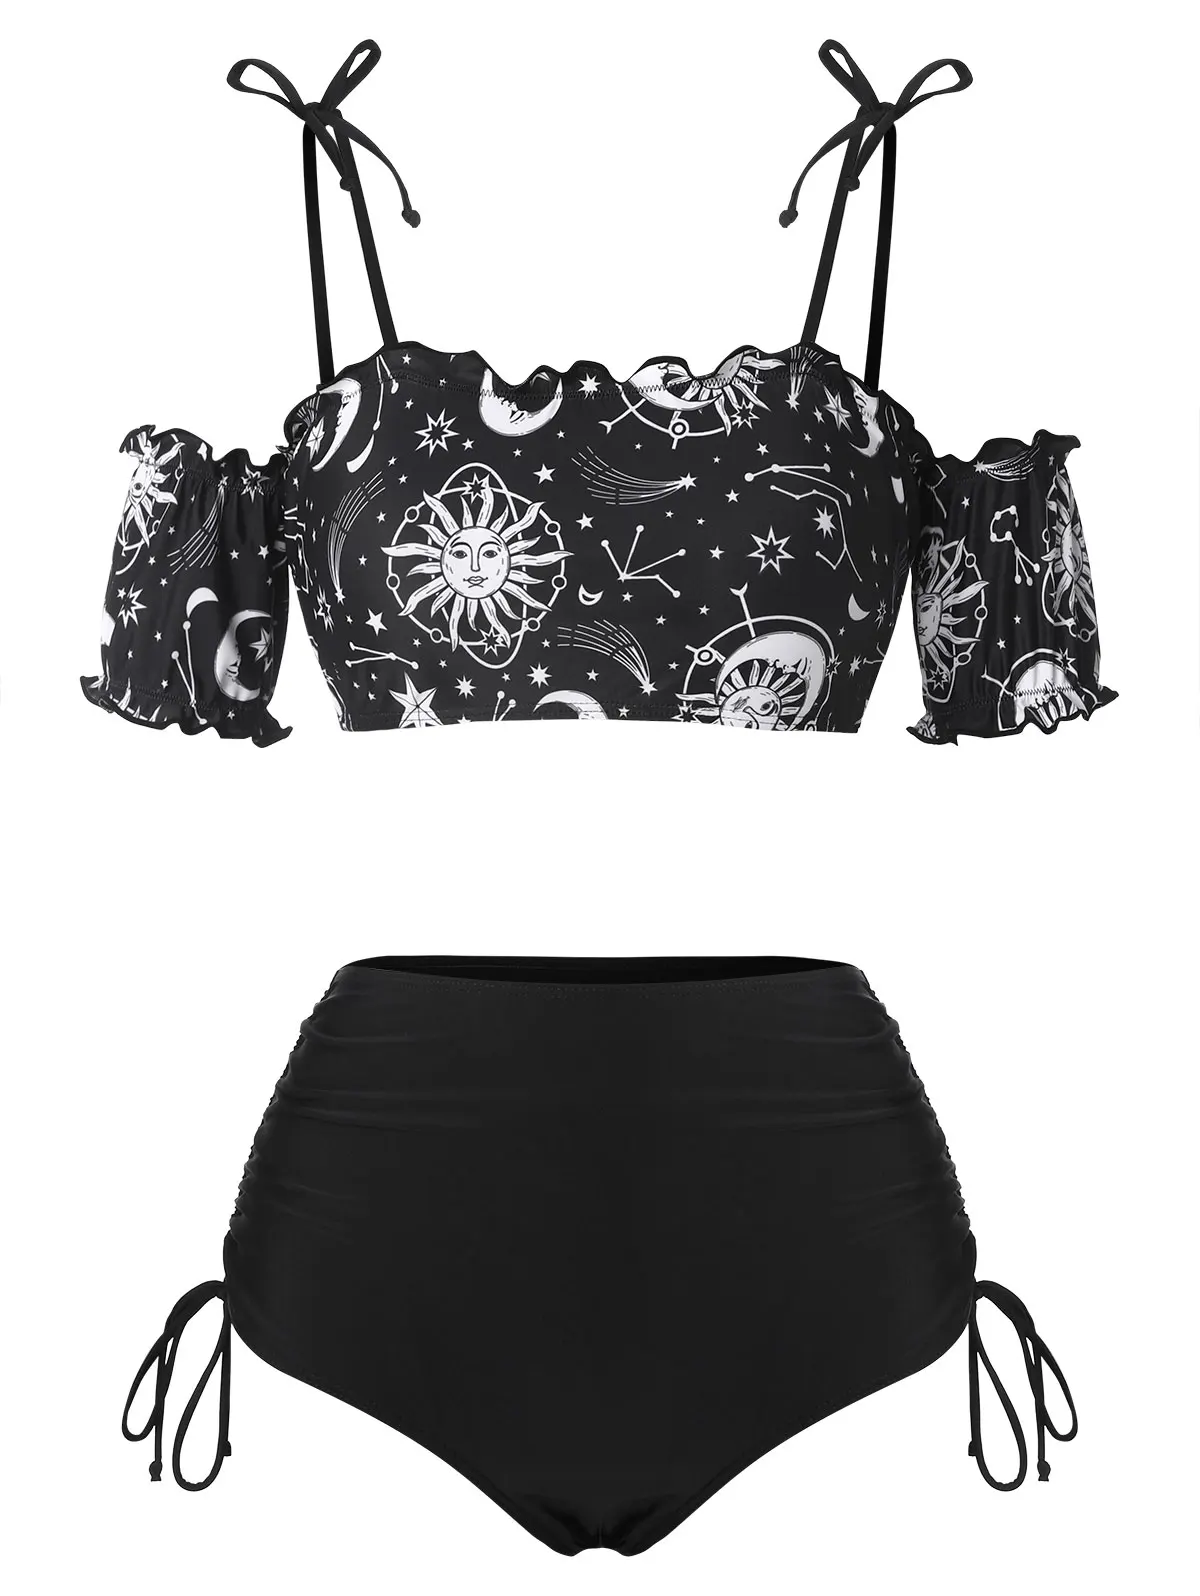 Gothic Puff Sleeve Swimsuit Two-Piece High Waist Bikinis Briefs Cinched Top Set Removable Pads Women Swimwear Bathing Suit New